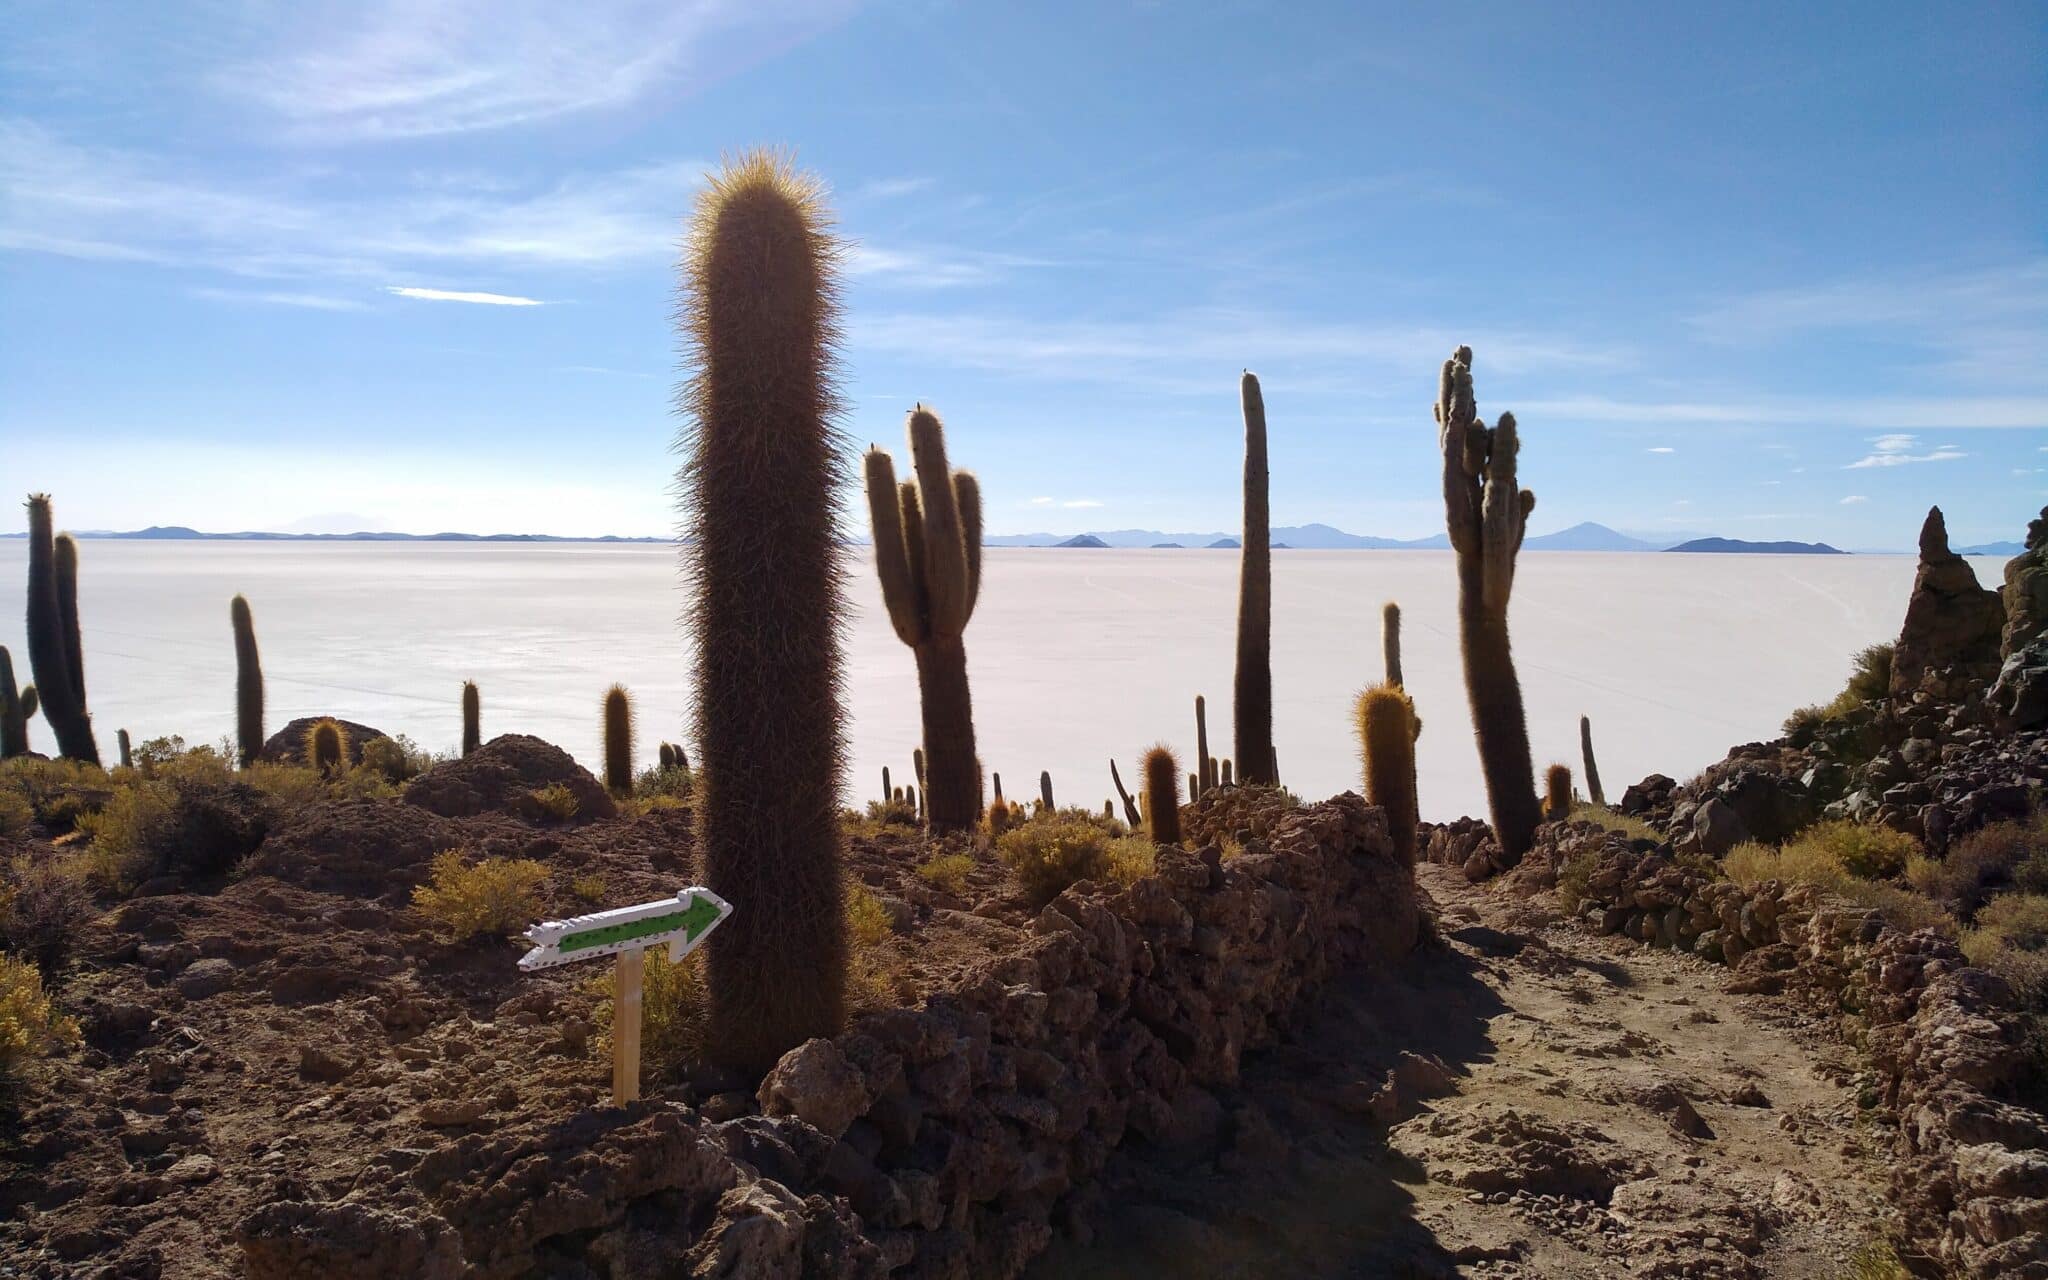 Cacti, Through Which A Path Leads Through, In The Background The Expanse Of The Salt Desert And Mountains On The Horizon.